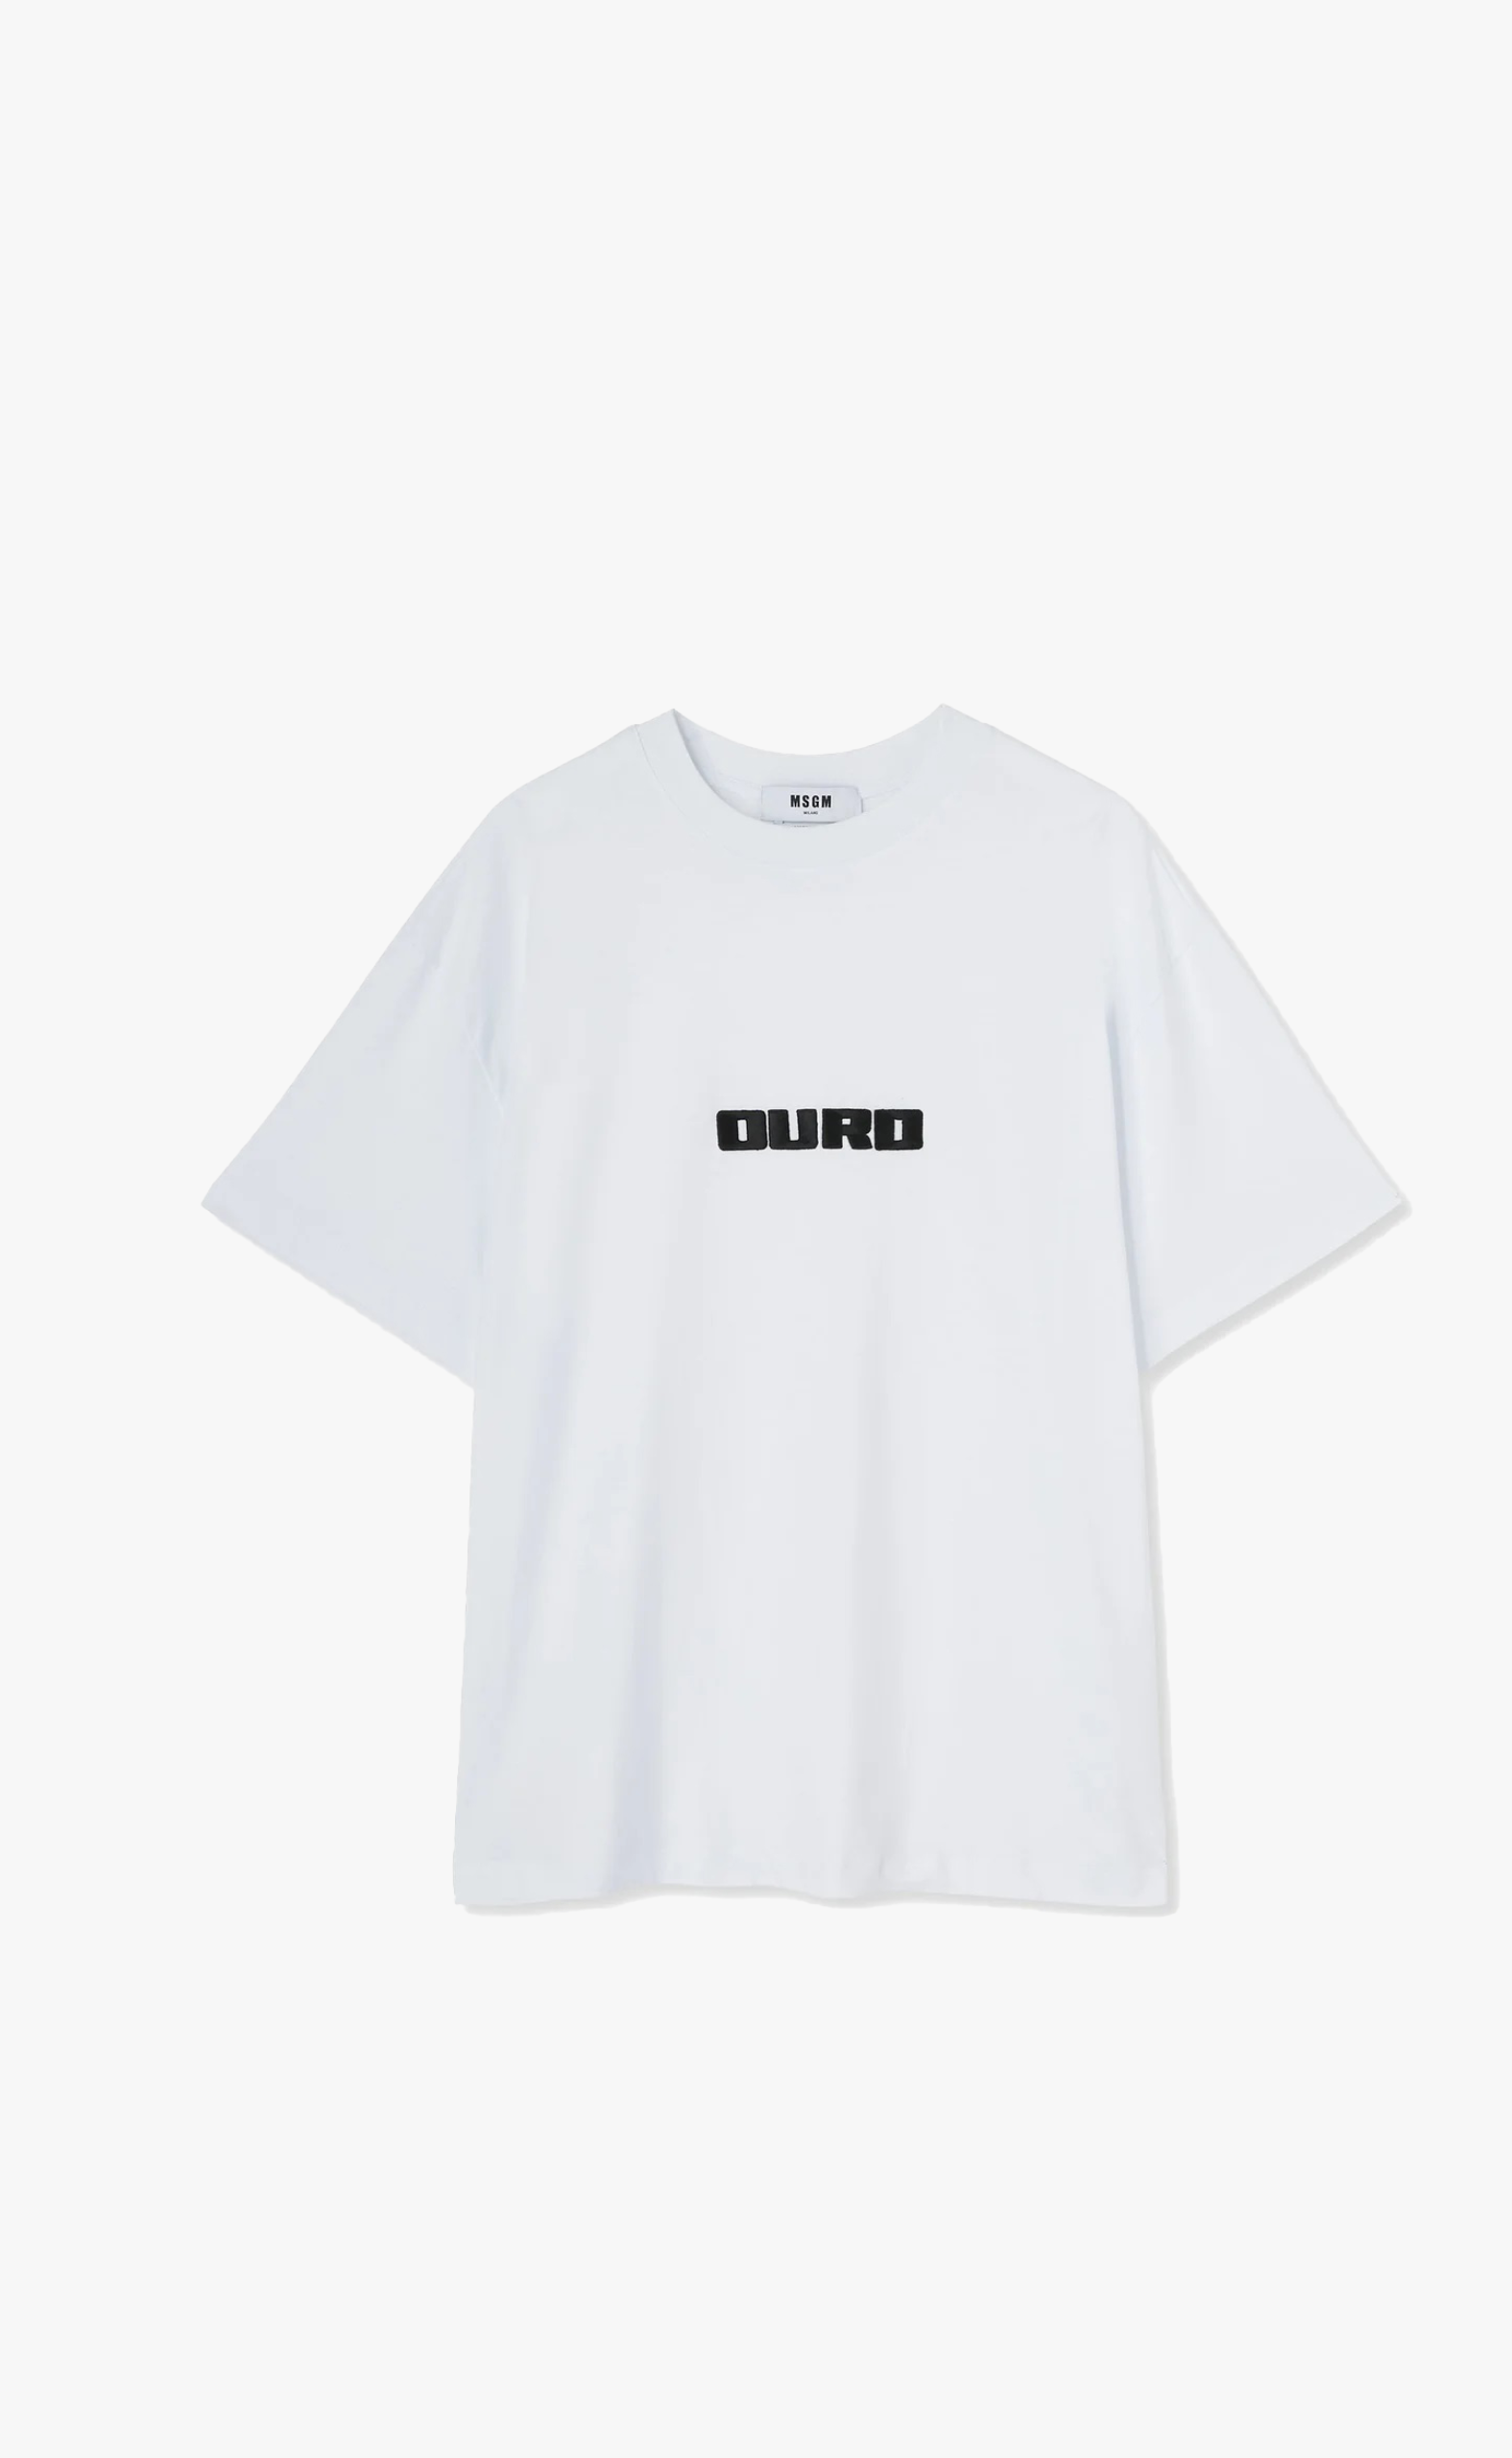  EMBROIDERED DURO OPTICAL WHITE T-SHIRT